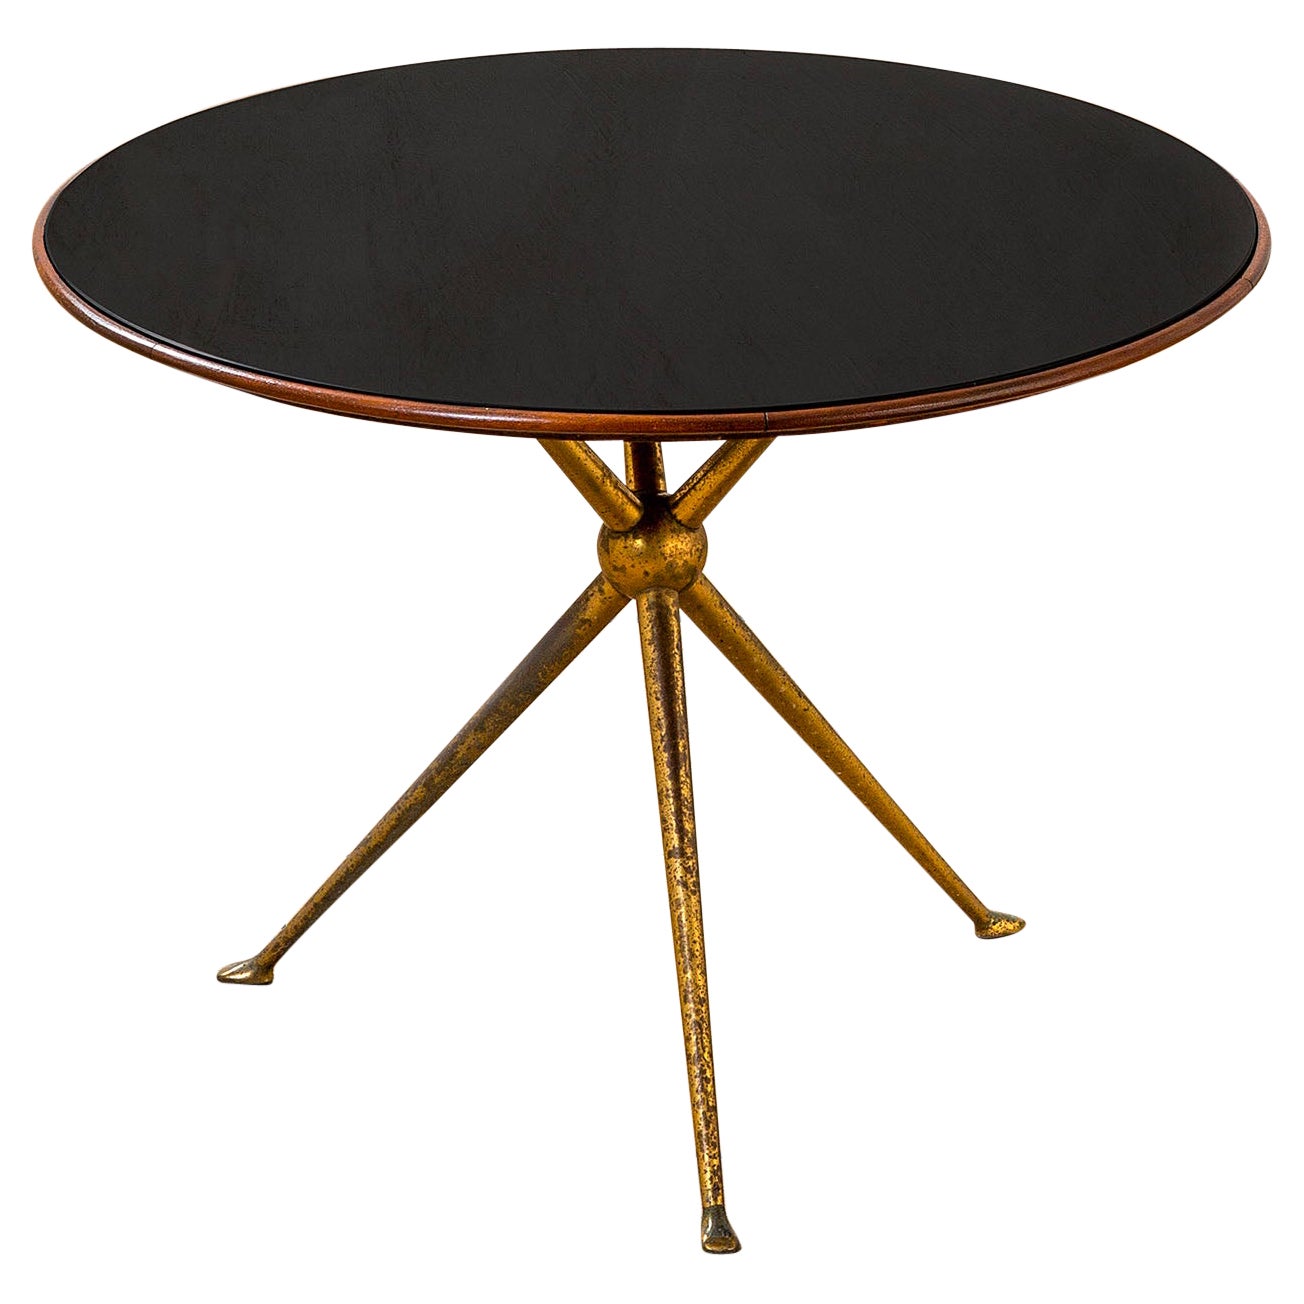 20th Century Osvaldo Borsani Tripod Side Table Brass, Wood and Glass for Abv 50s For Sale